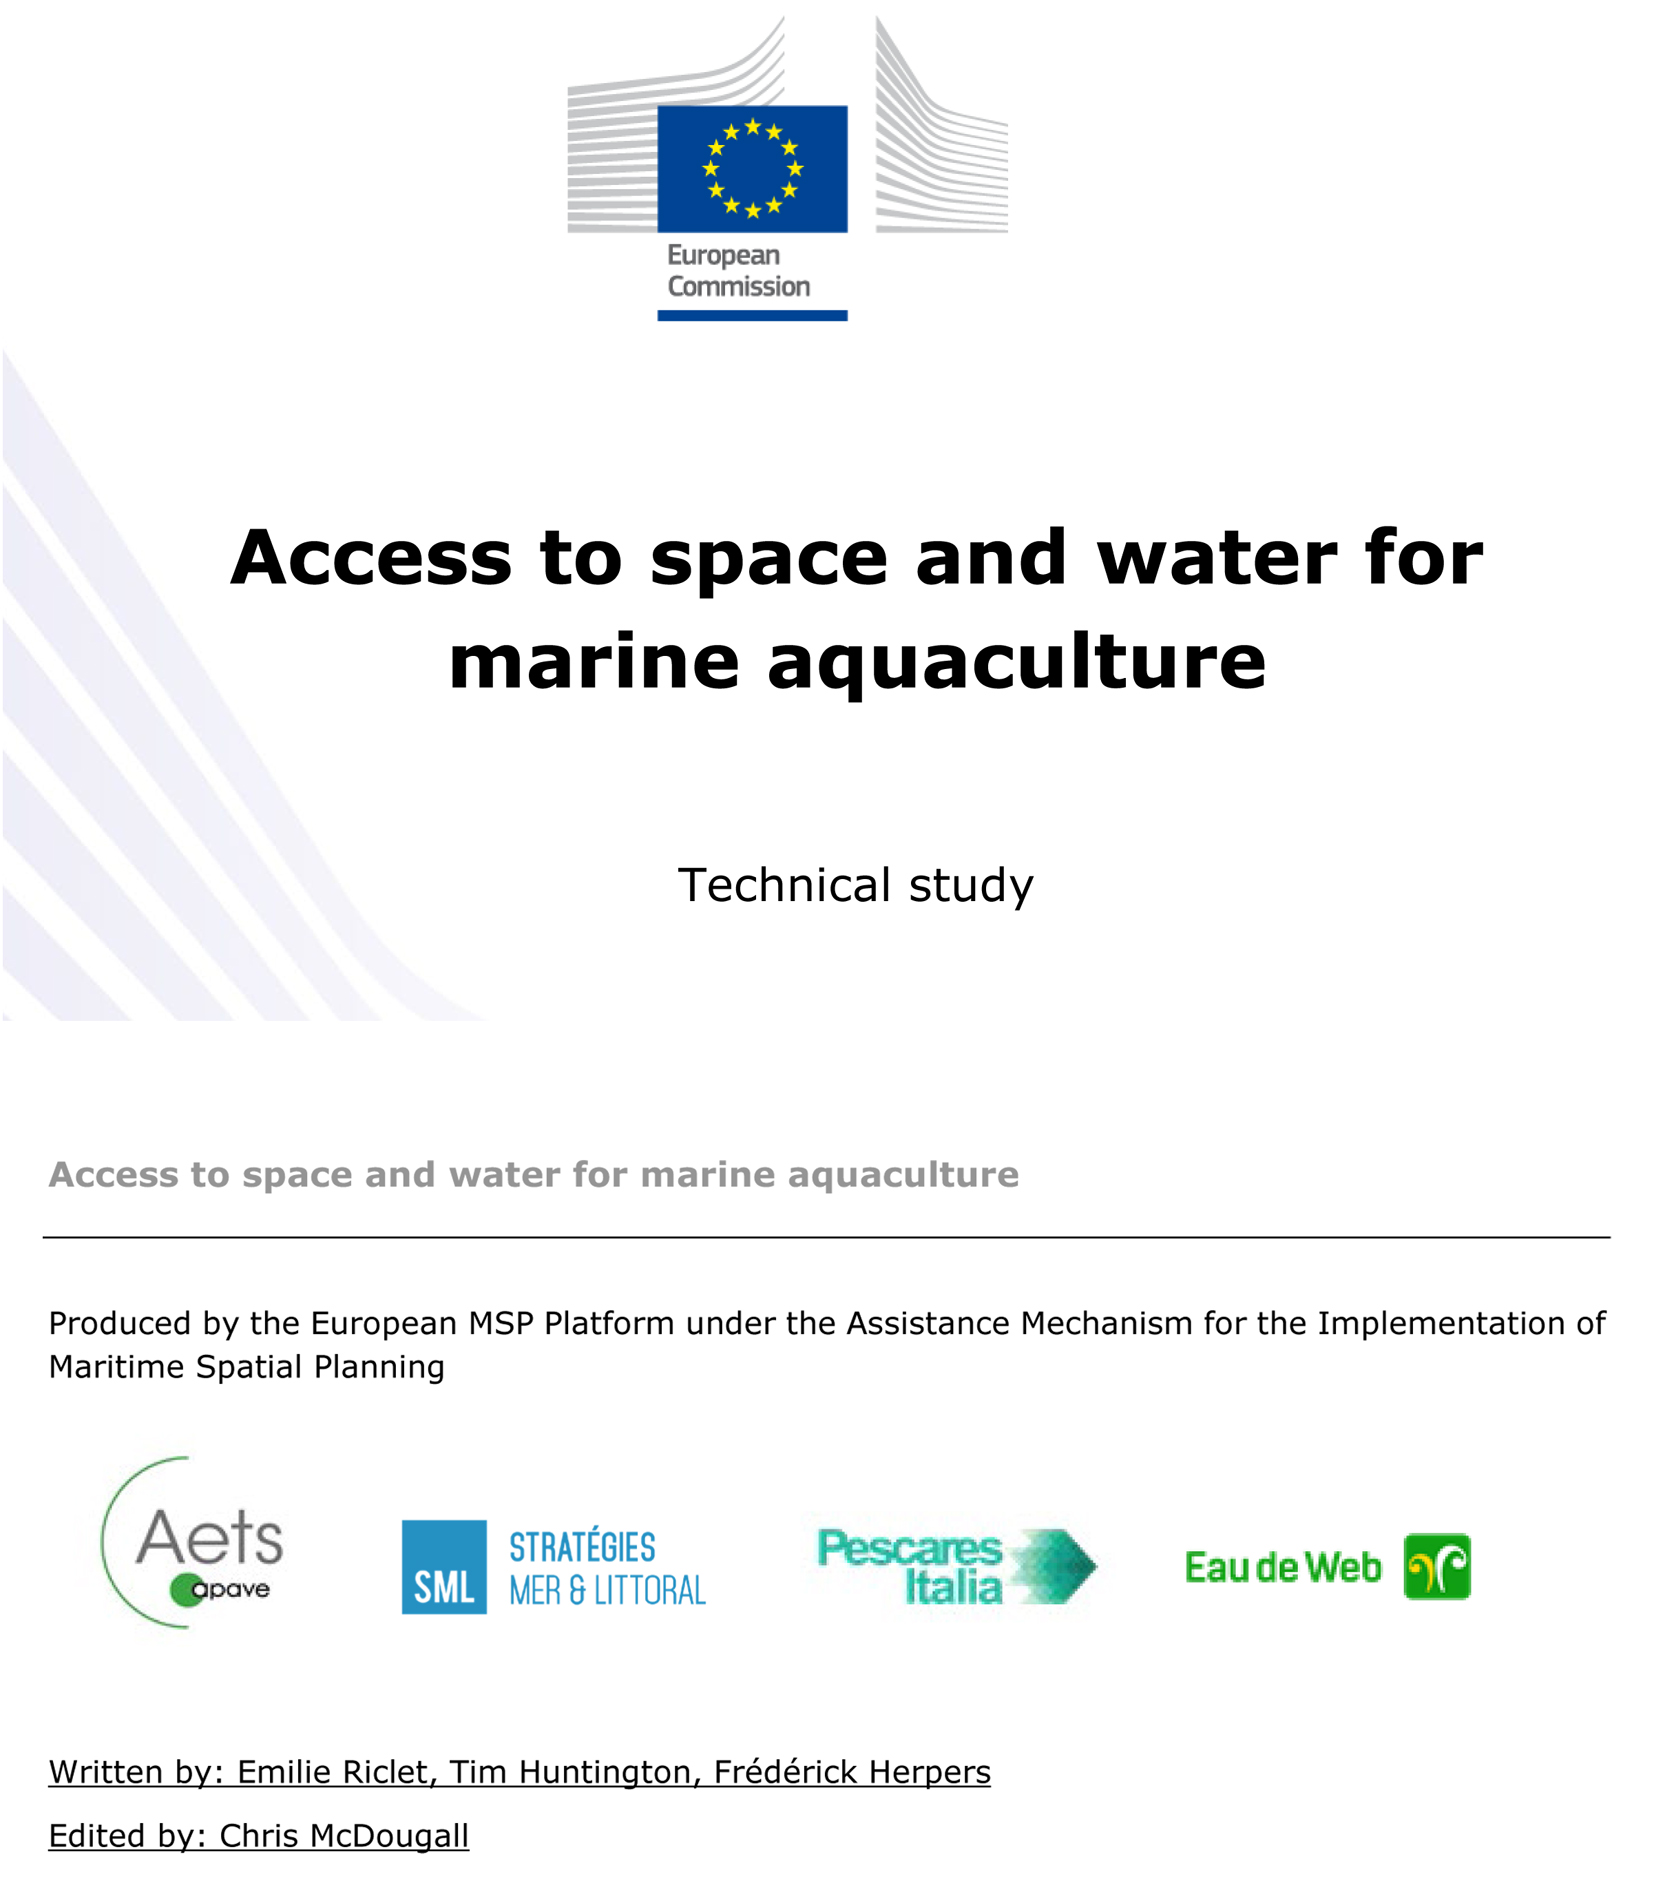 Access to space and water for marine aquaculture